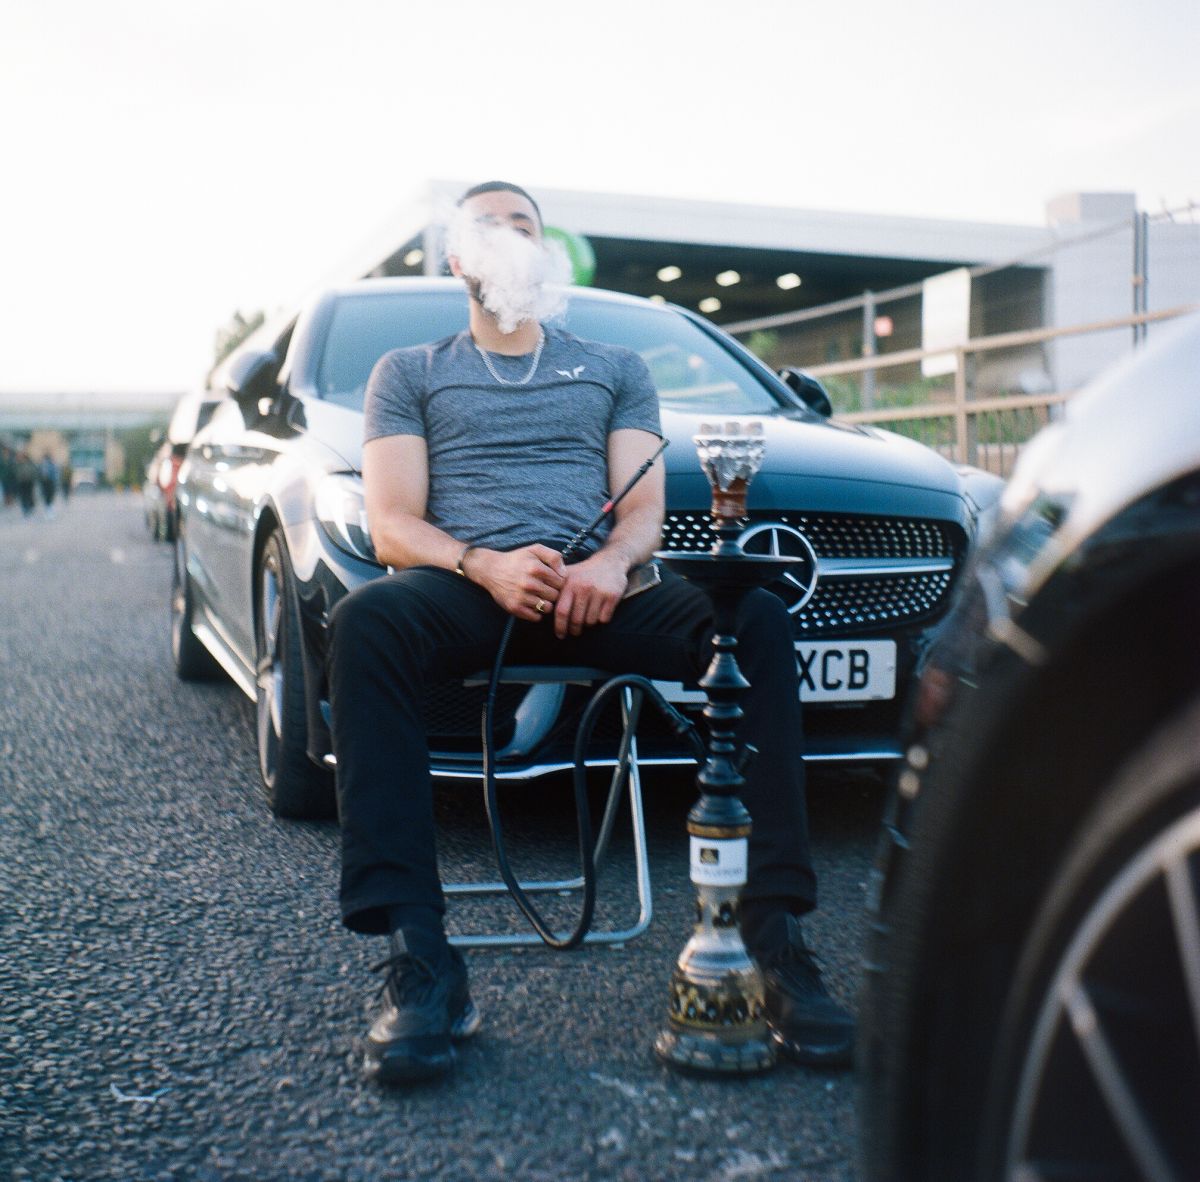 A man sitting in front of a car smoking a shisha pipe